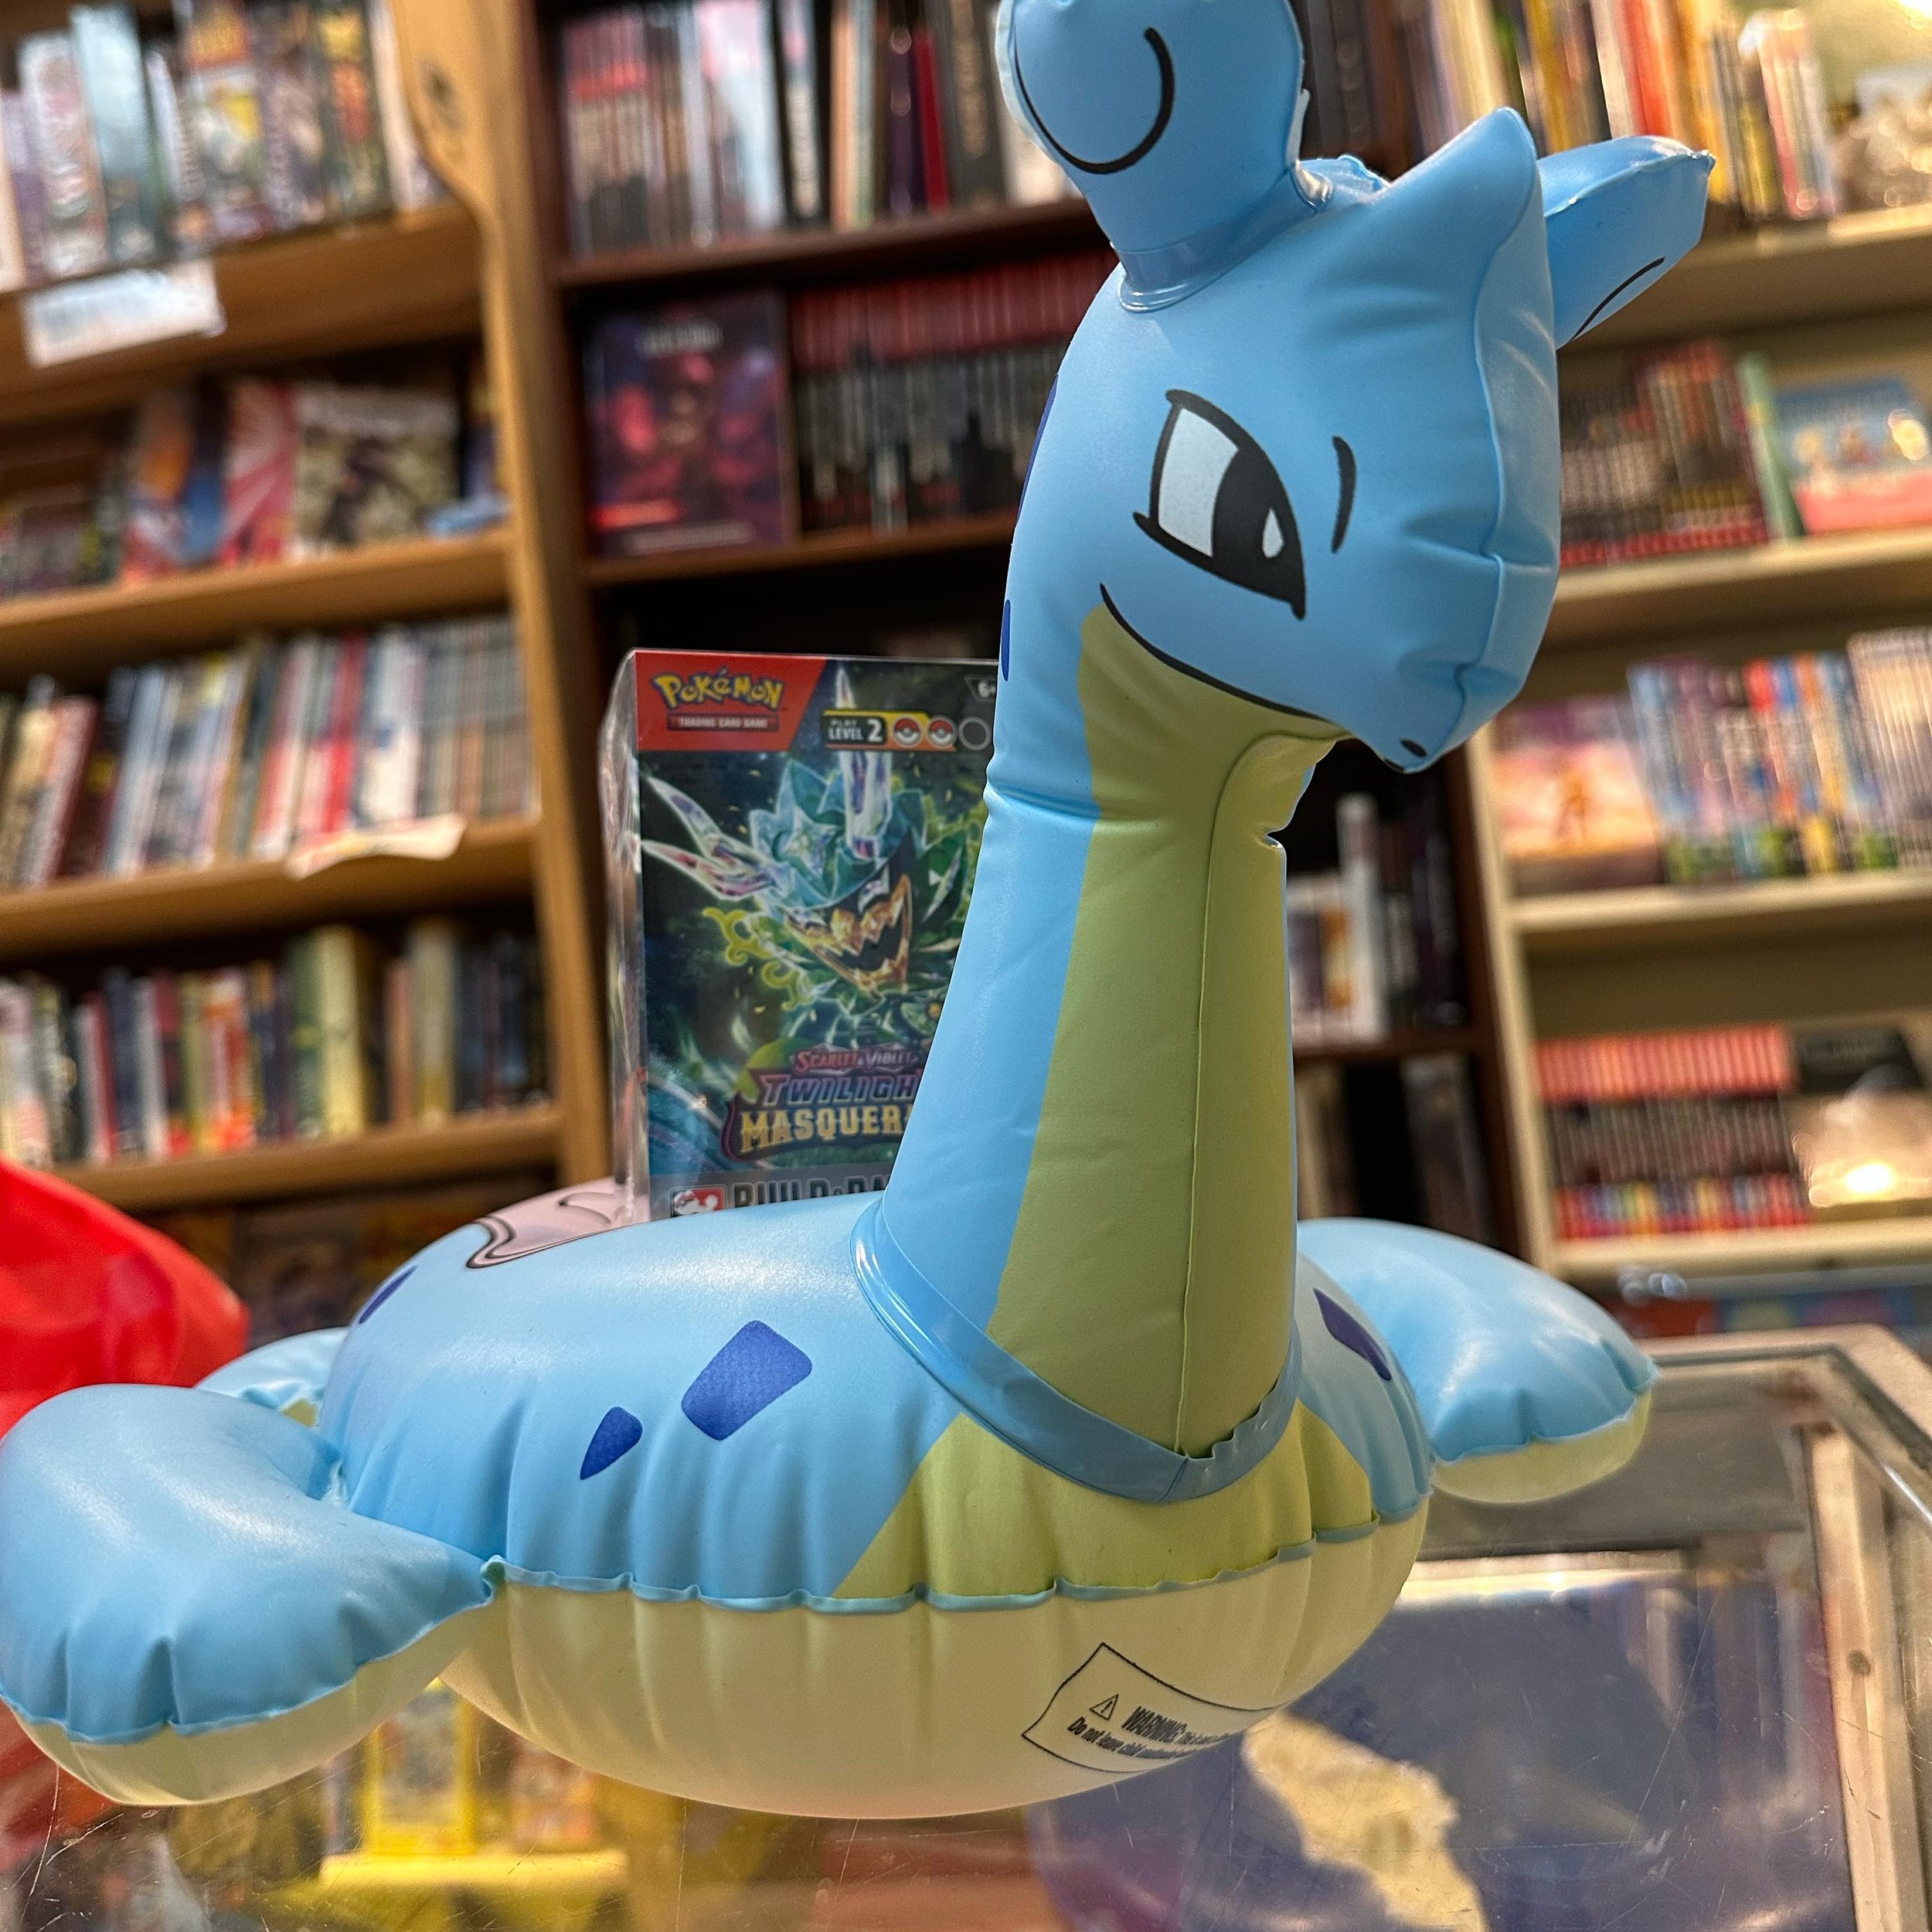 Dive into our Twilight Masquerade prereleases this weekend! Saturday and Sunday, 2 pm. $25 entry. More details on our website, The3rdUniverse.com 🐳 See you there!!